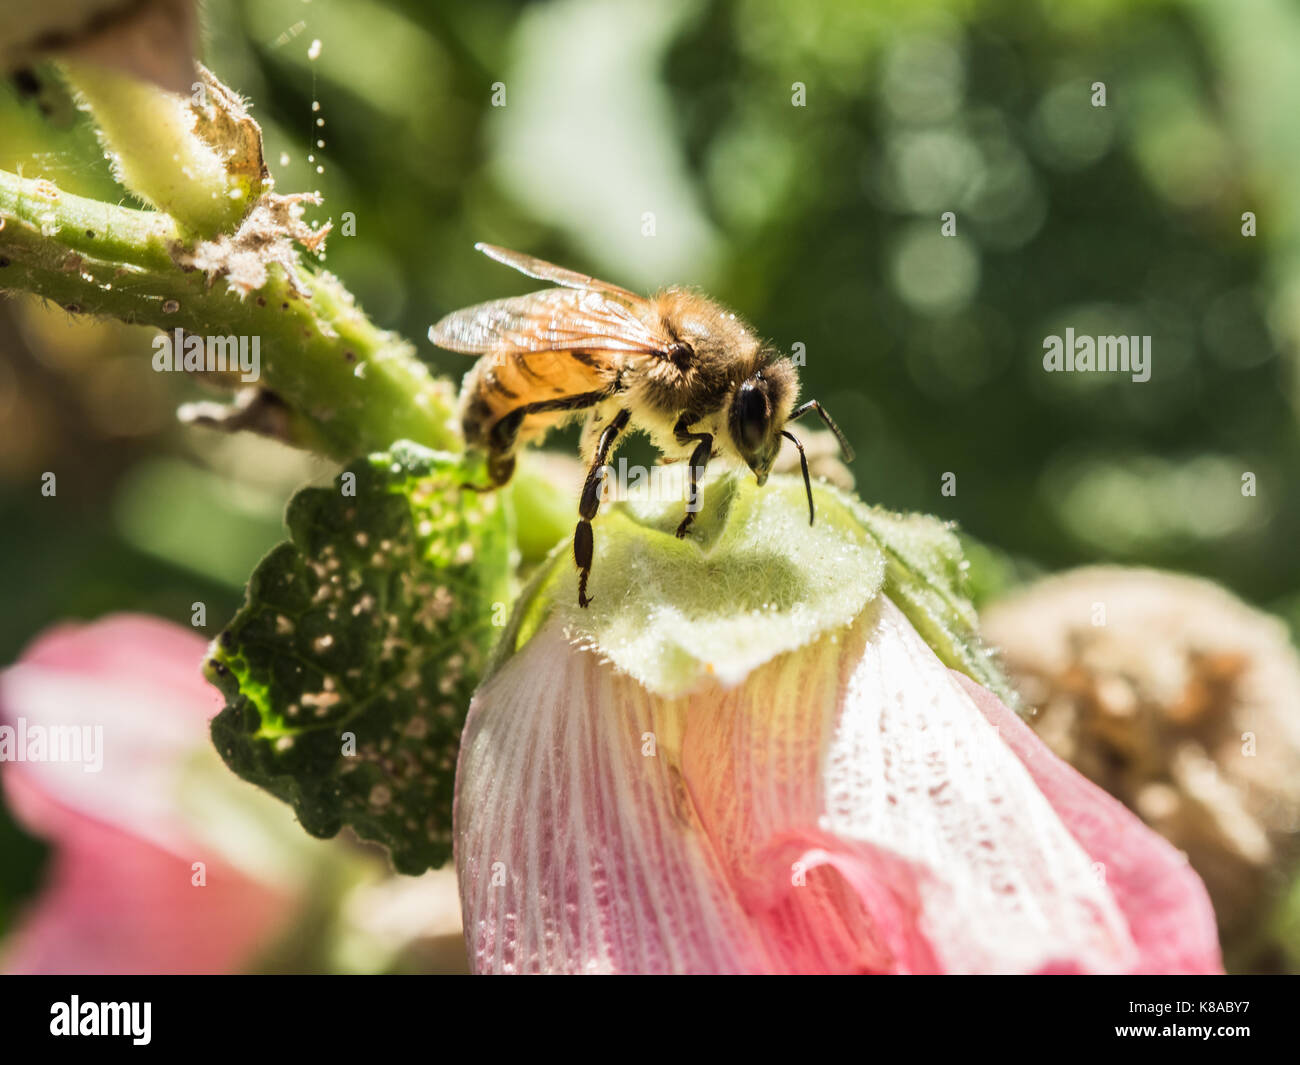 Pollinating. Cute picture of western honey bee. Bee pollinate pink flower. Macro view. Close-up. Green background. Stock Photo